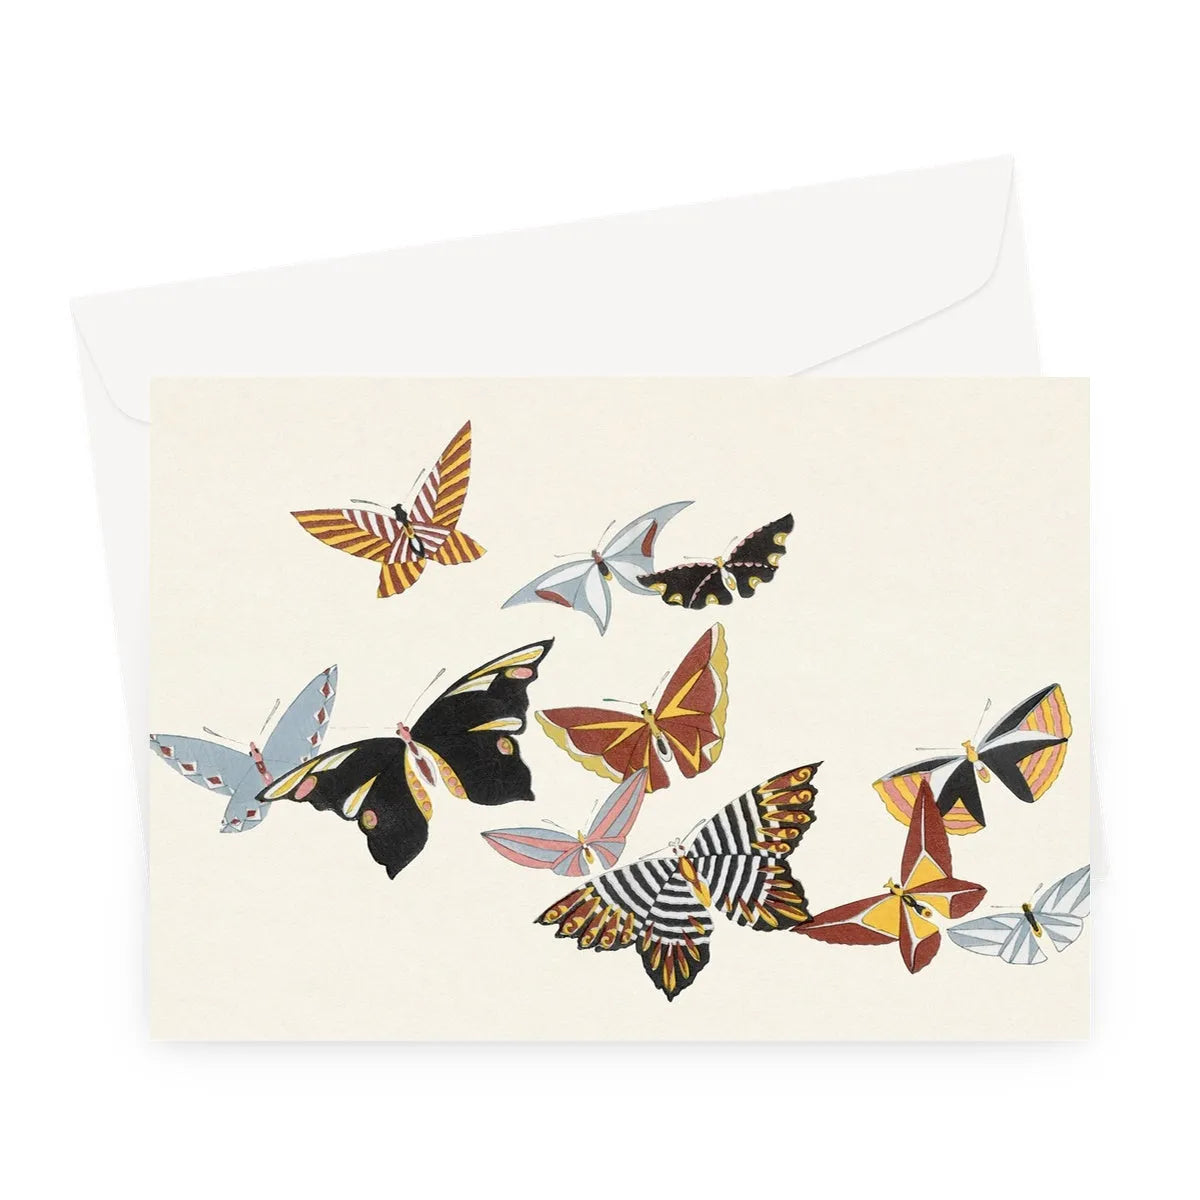 Japanese Butterflies By Kamisaka Sekka Greeting Card - A5 Landscape / 1 Card - Greeting & Note Cards - Aesthetic Art